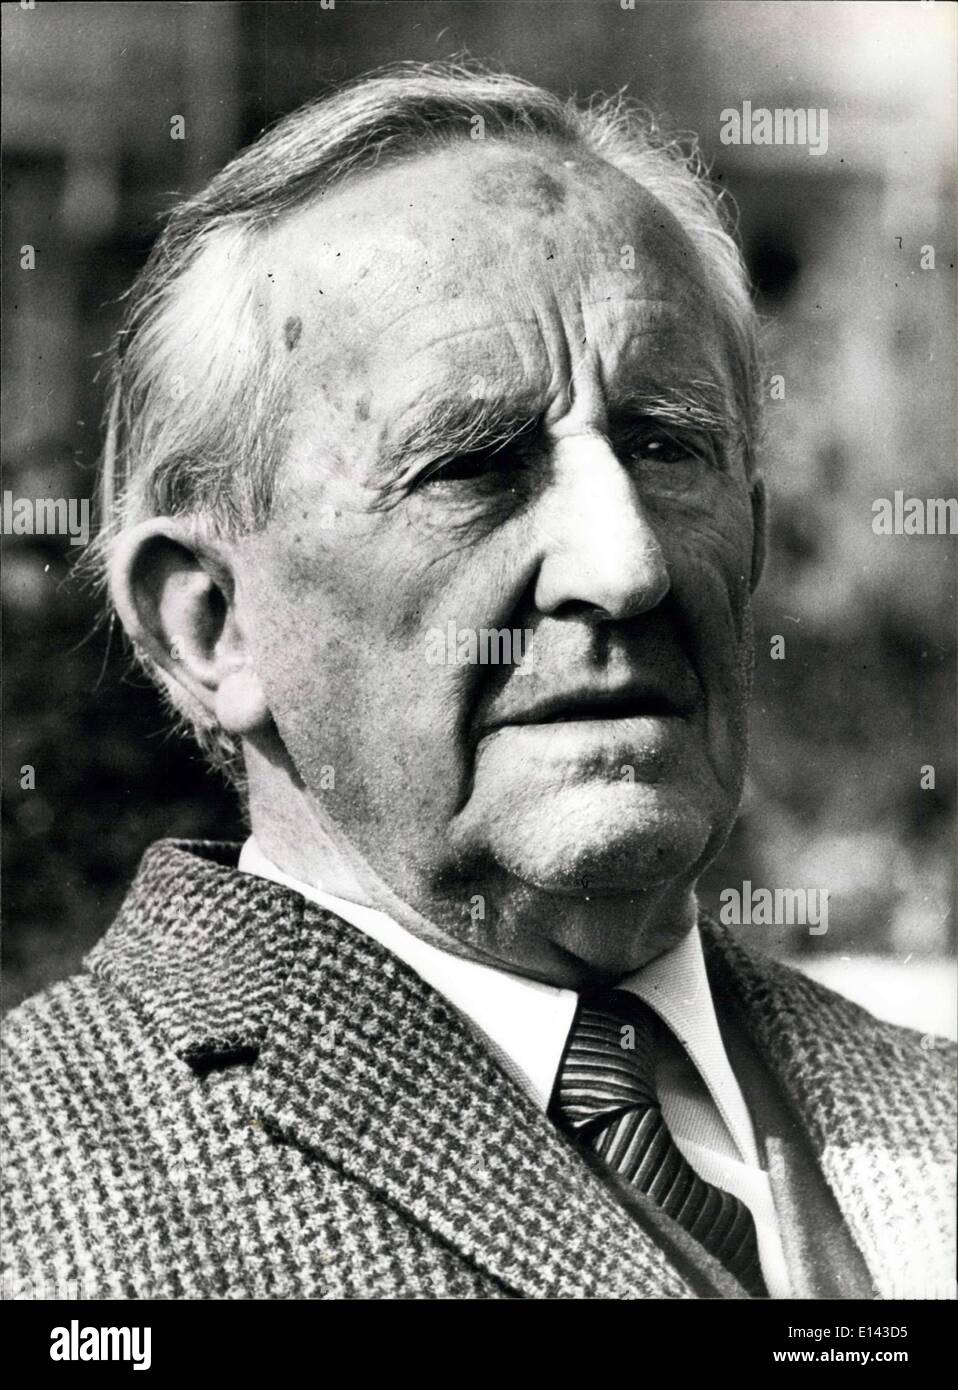 Apr. 04, 2012 - Professor J.R.R. Tolkien: Author if the Lord of the Rings. Stock Photo